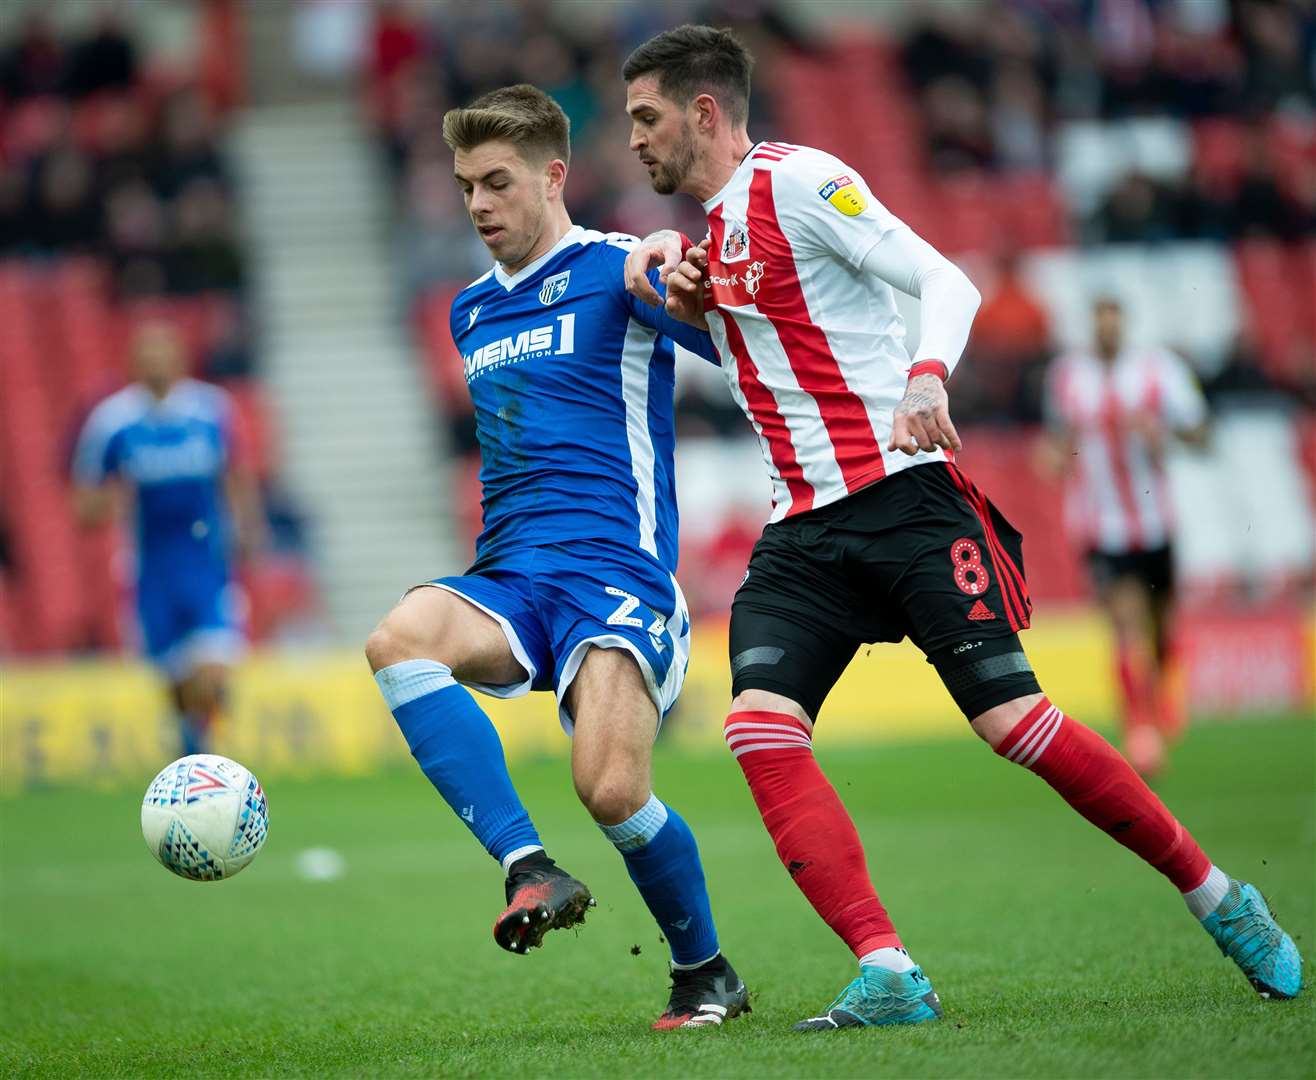 Jack Tucker in action for the Gills against Sunderland last season Picture: Ady Kerry